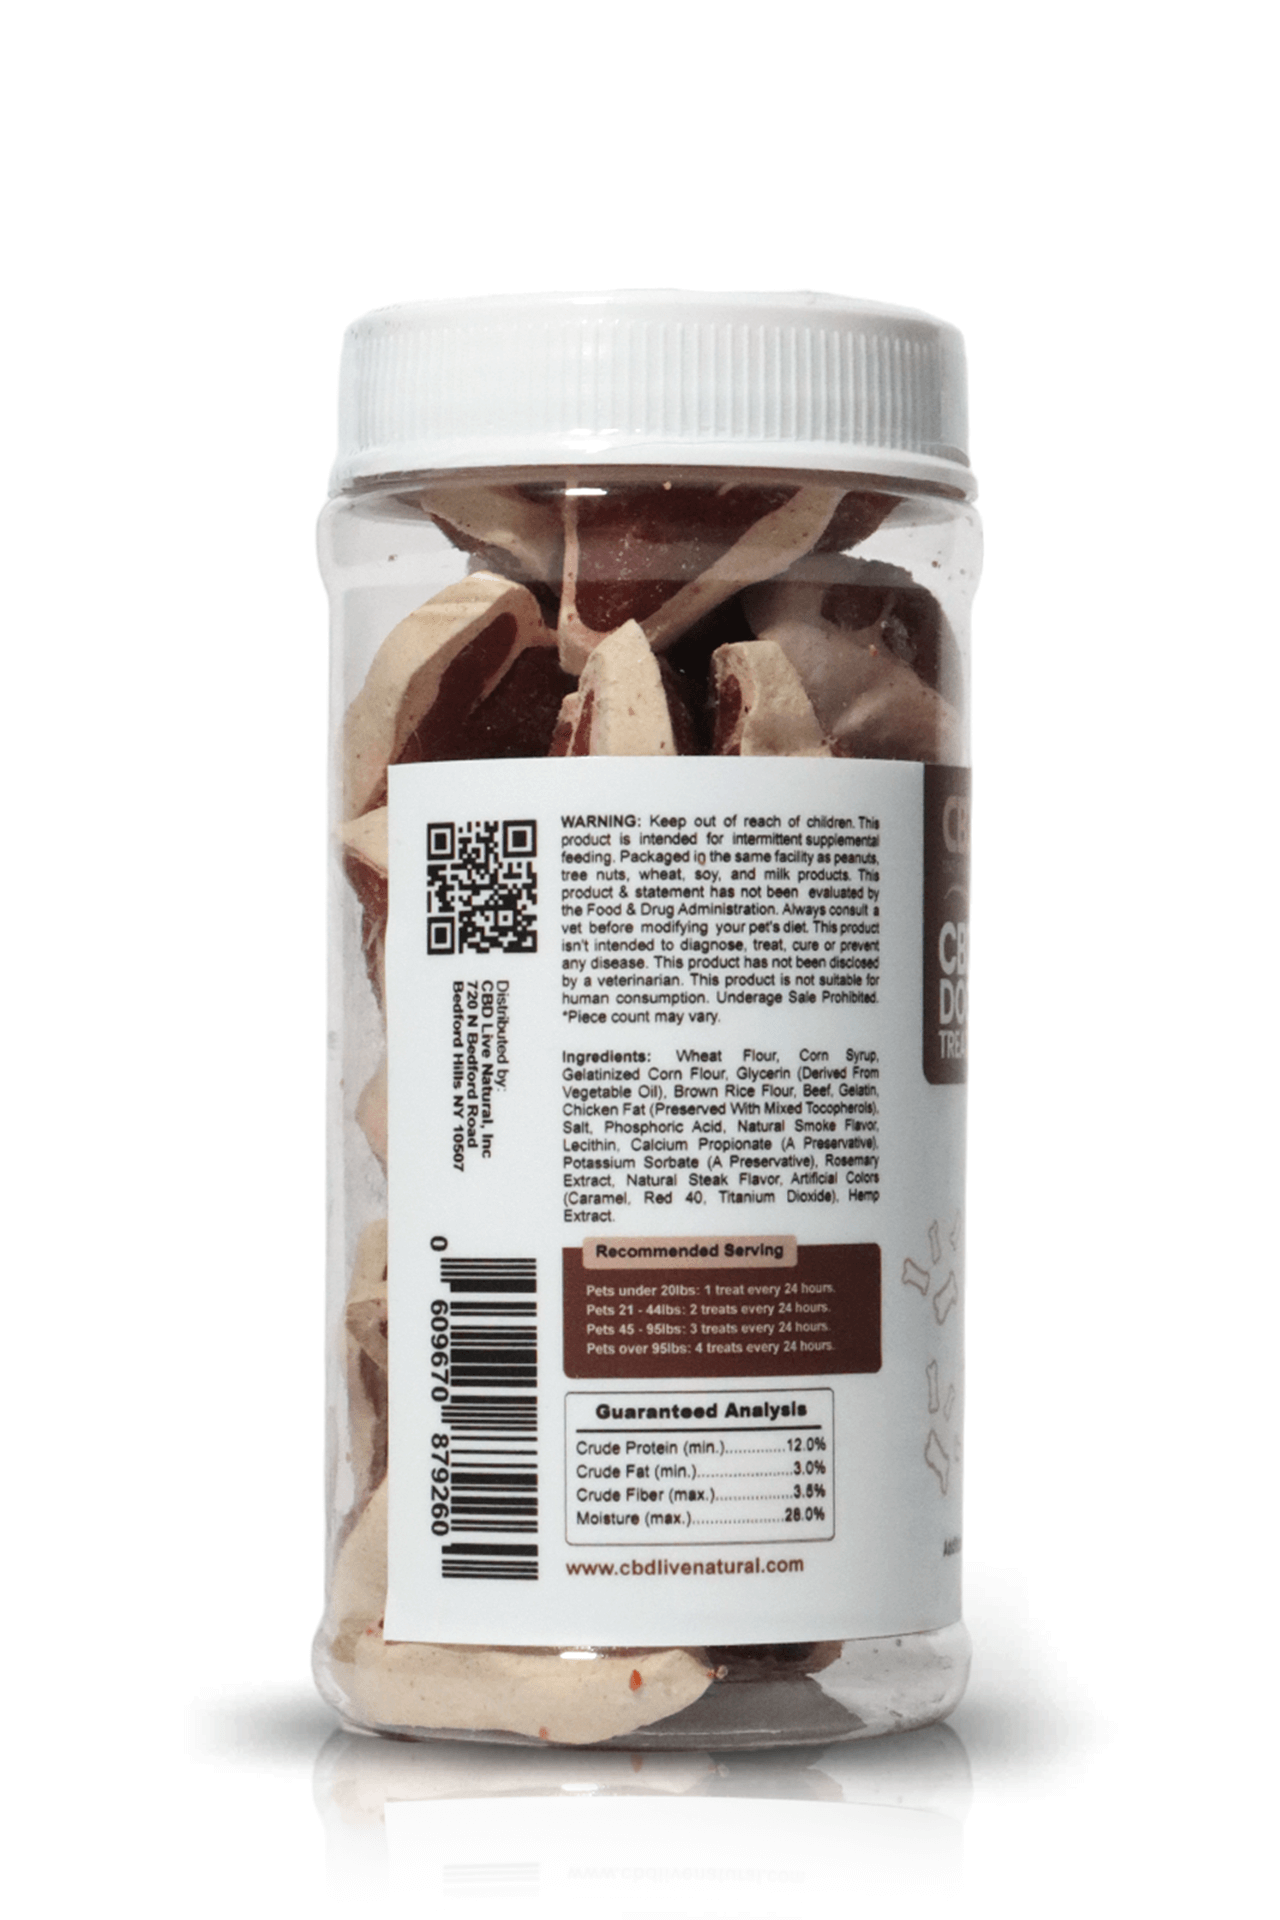 CBD Dog Treats Steak Bites 400mg jar filled with dog treats, displaying a detailed label with warning, ingredients, and nutritional information.